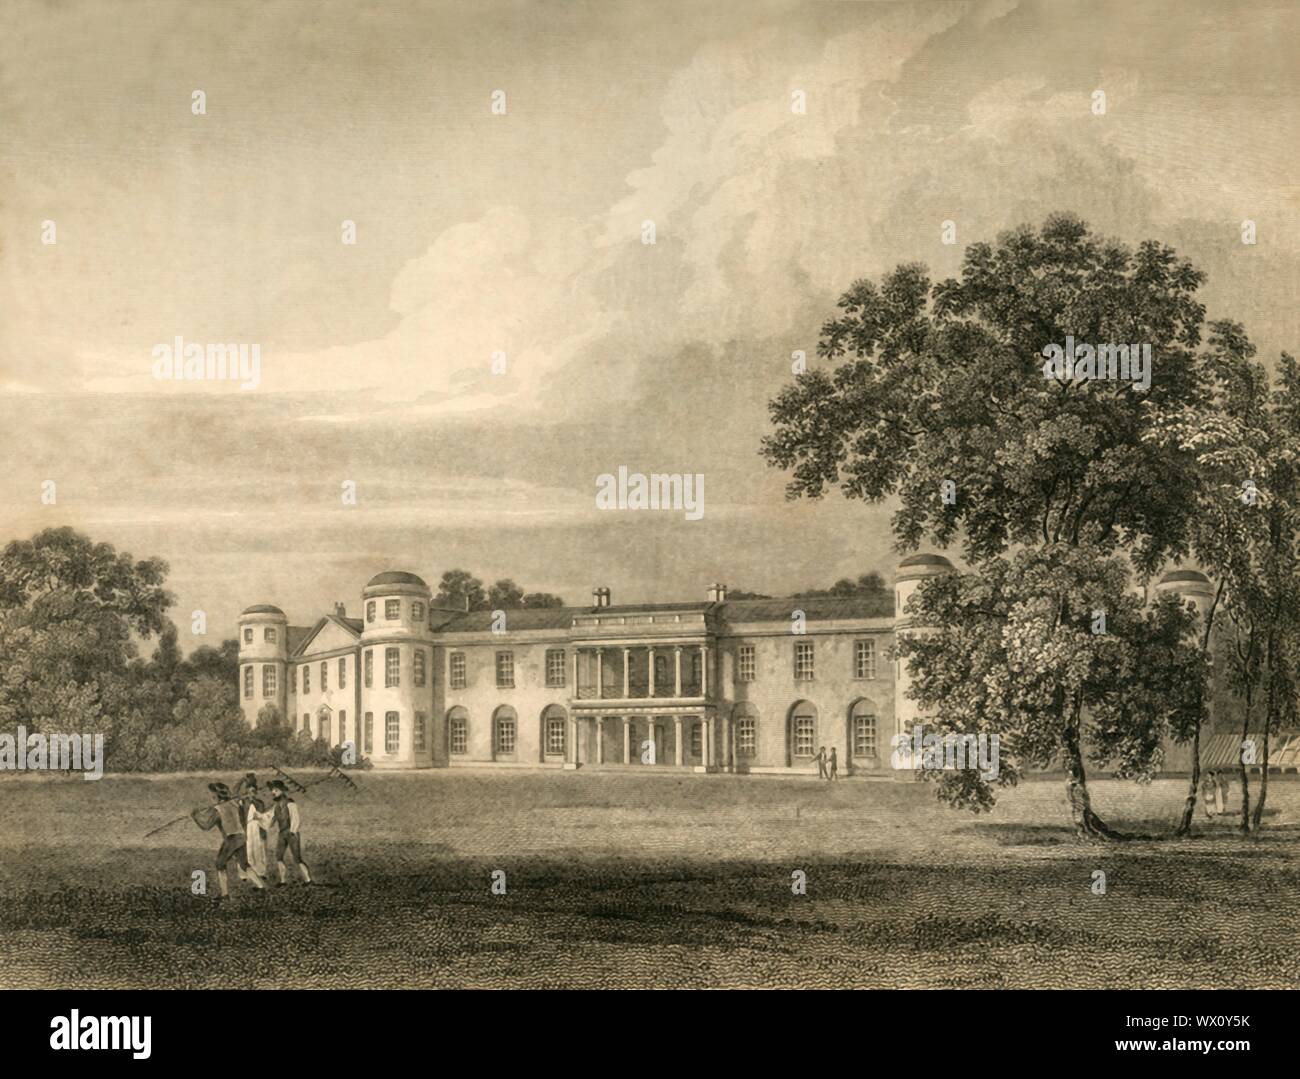 'Goodwood', 1835. Goodwood House, Grade I listed country house in Westhampnett, West Sussex  built c1600 and home to the Duke of Richmond. From &quot;The History, Antiquities, and Topography of the County of Sussex, Volume the Second&quot;, by Thomas Walker Horsfield, F.S.A. [Baxter, Sussex Press, Lewes; Messrs. Nichols and Son, London, (1835)] Stock Photo